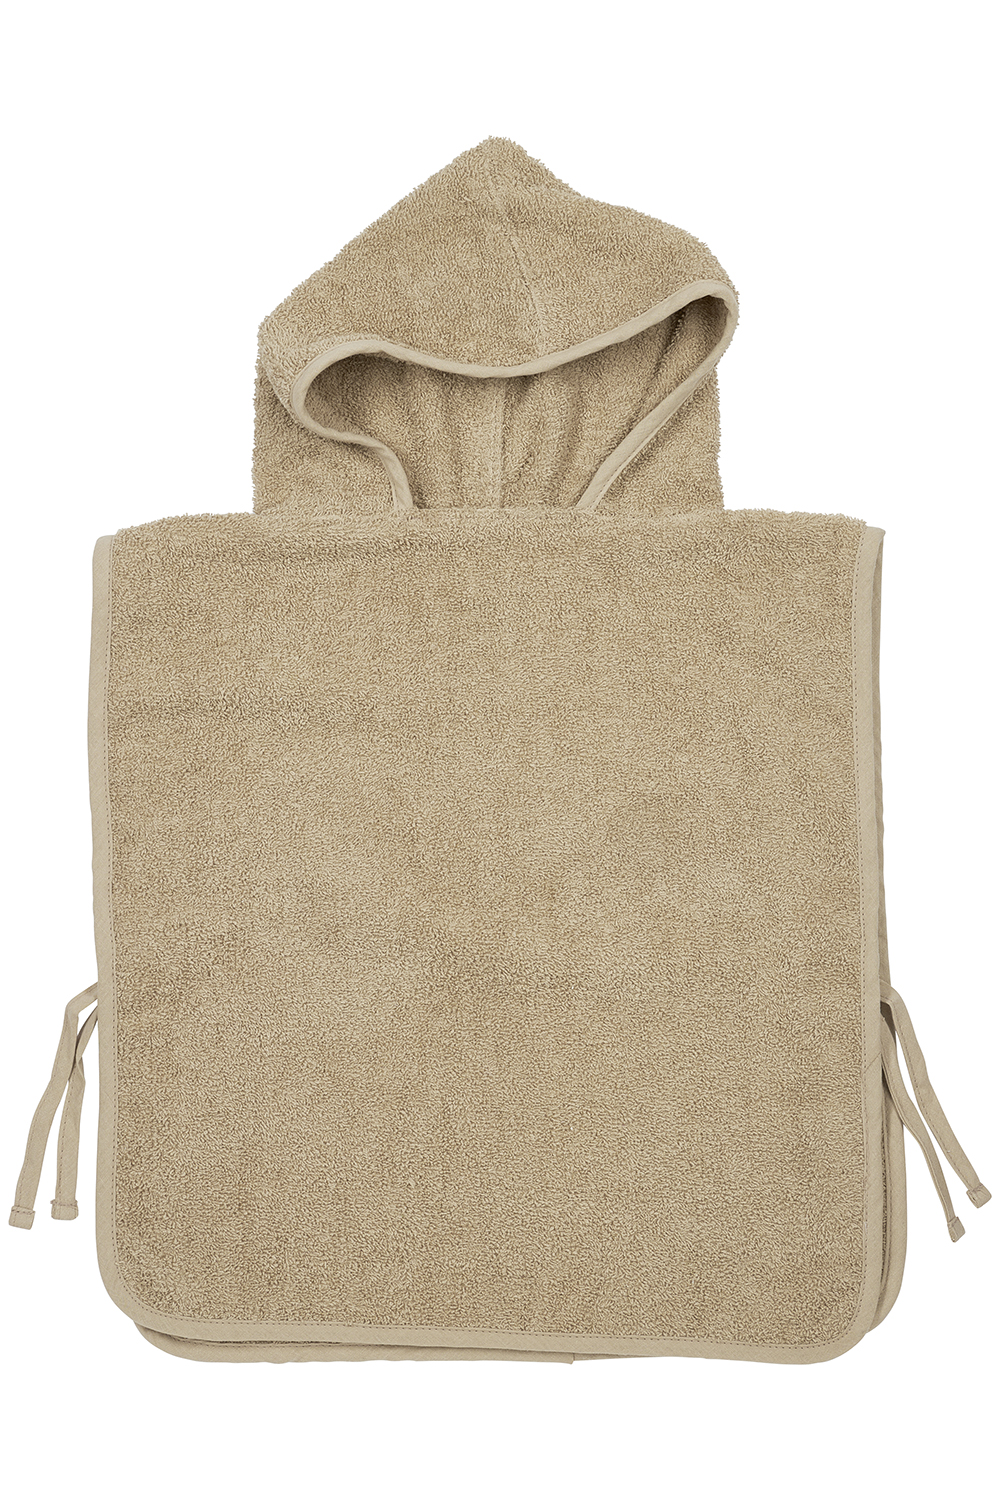 Badeponcho frottee Uni - sand - 1-3 Jahre